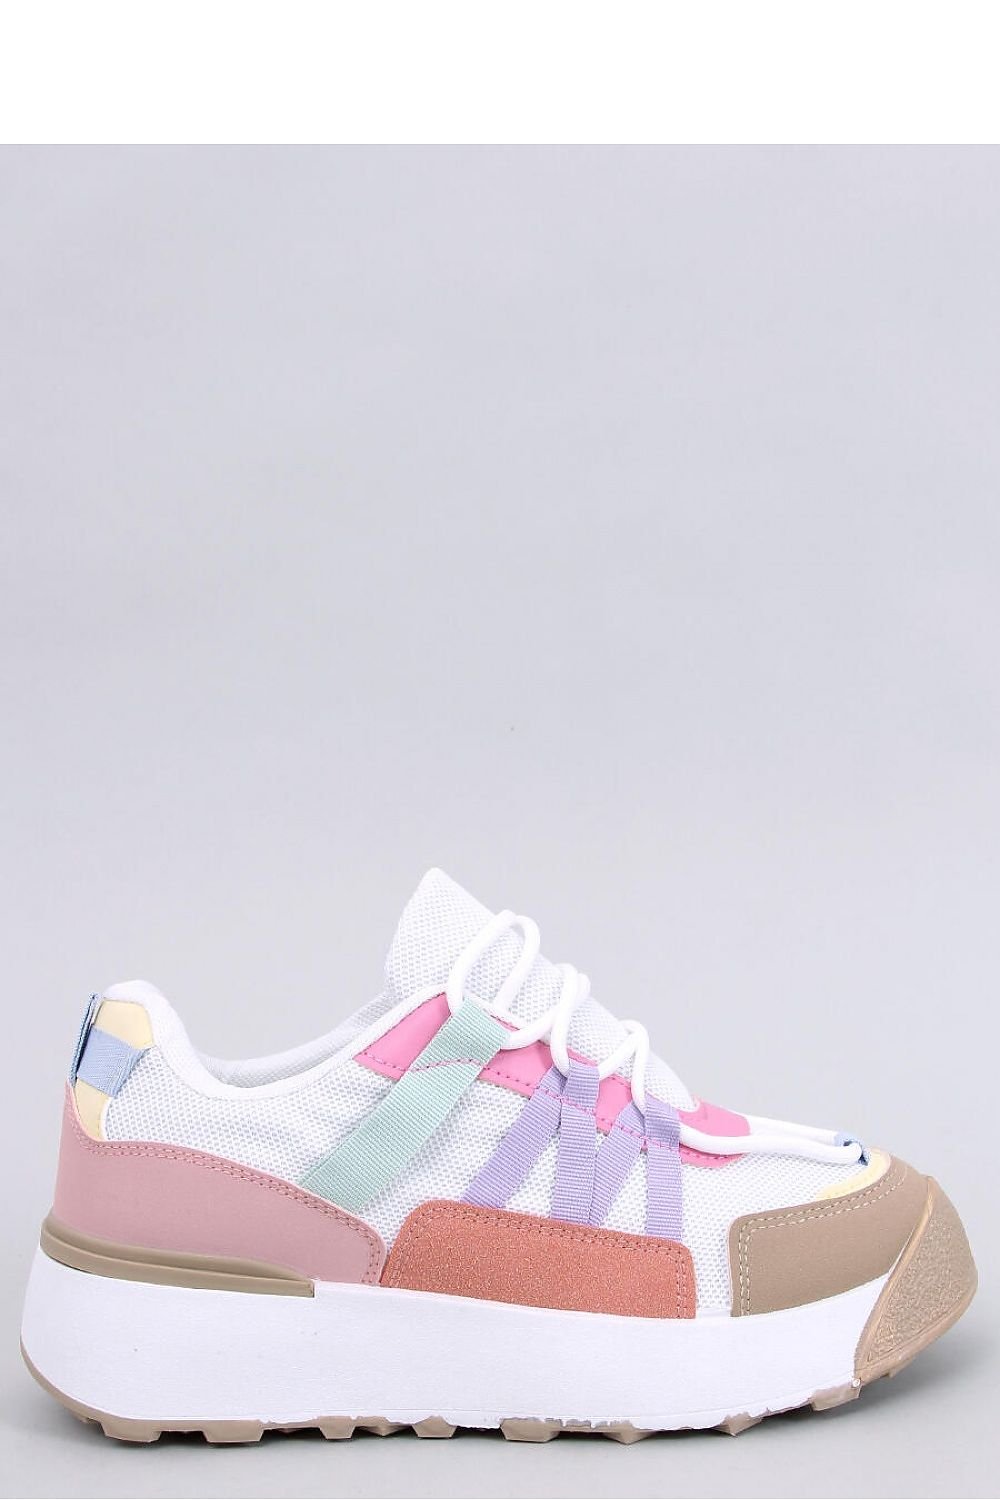 Inello Platform Sneakers: Colorful & Trendy Sports Shoes with High Soles